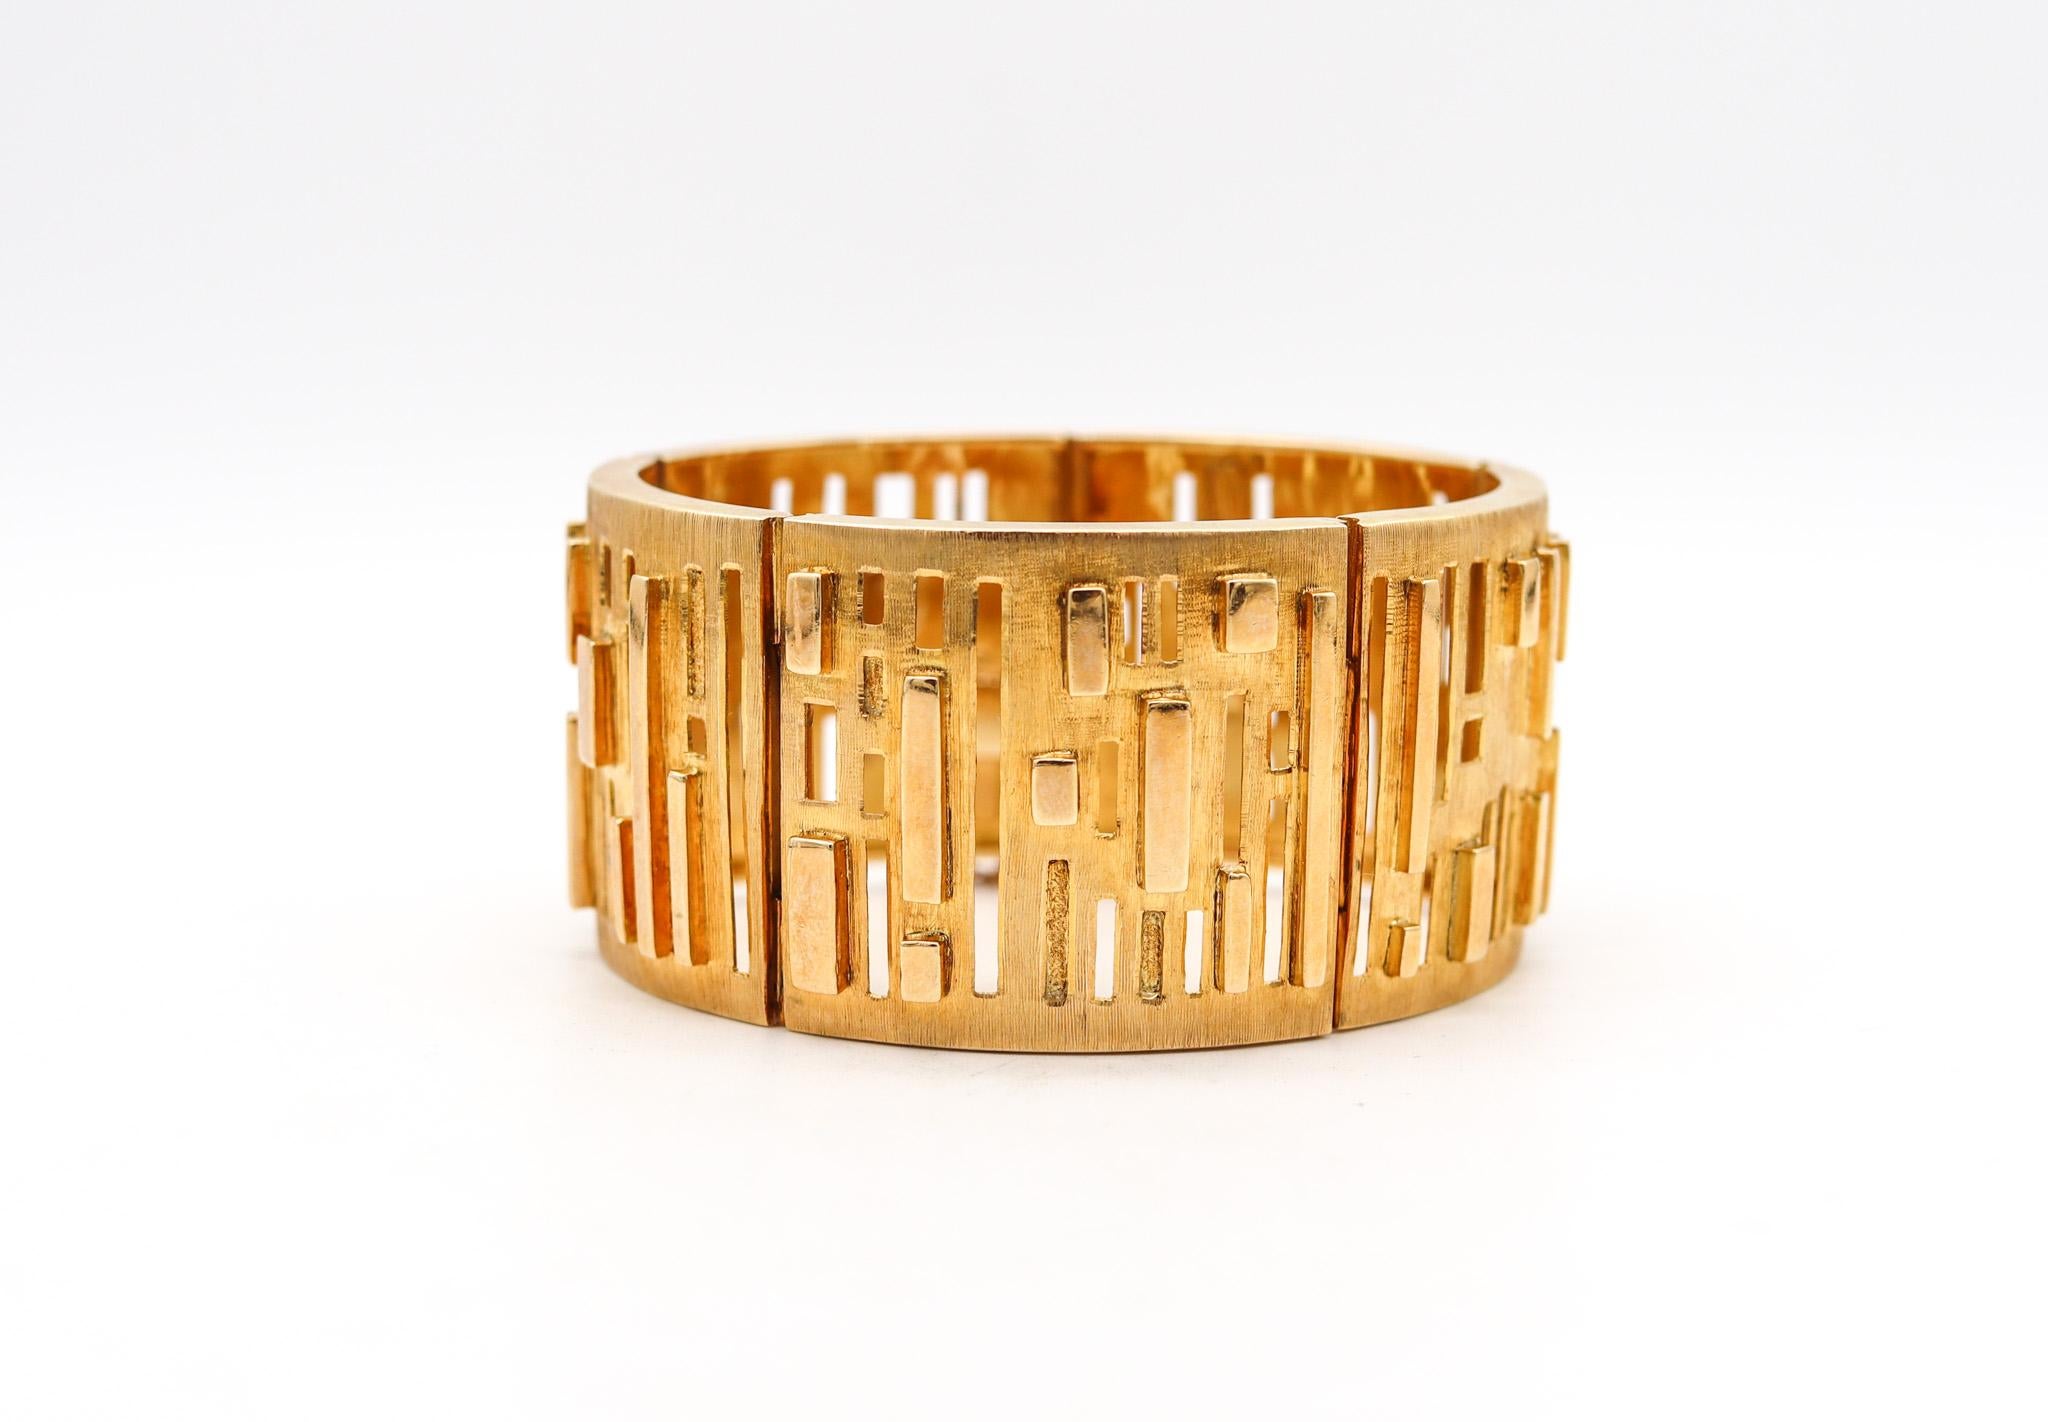 Bracelet designed by Haroldo Burle Marx.

An exceptional and very rare bracelet created in Brazil by the artist jeweler Haroldo Burle Marx back in the 1970. This artistic piece has been crafted with architectural and concretism art patterns in solid